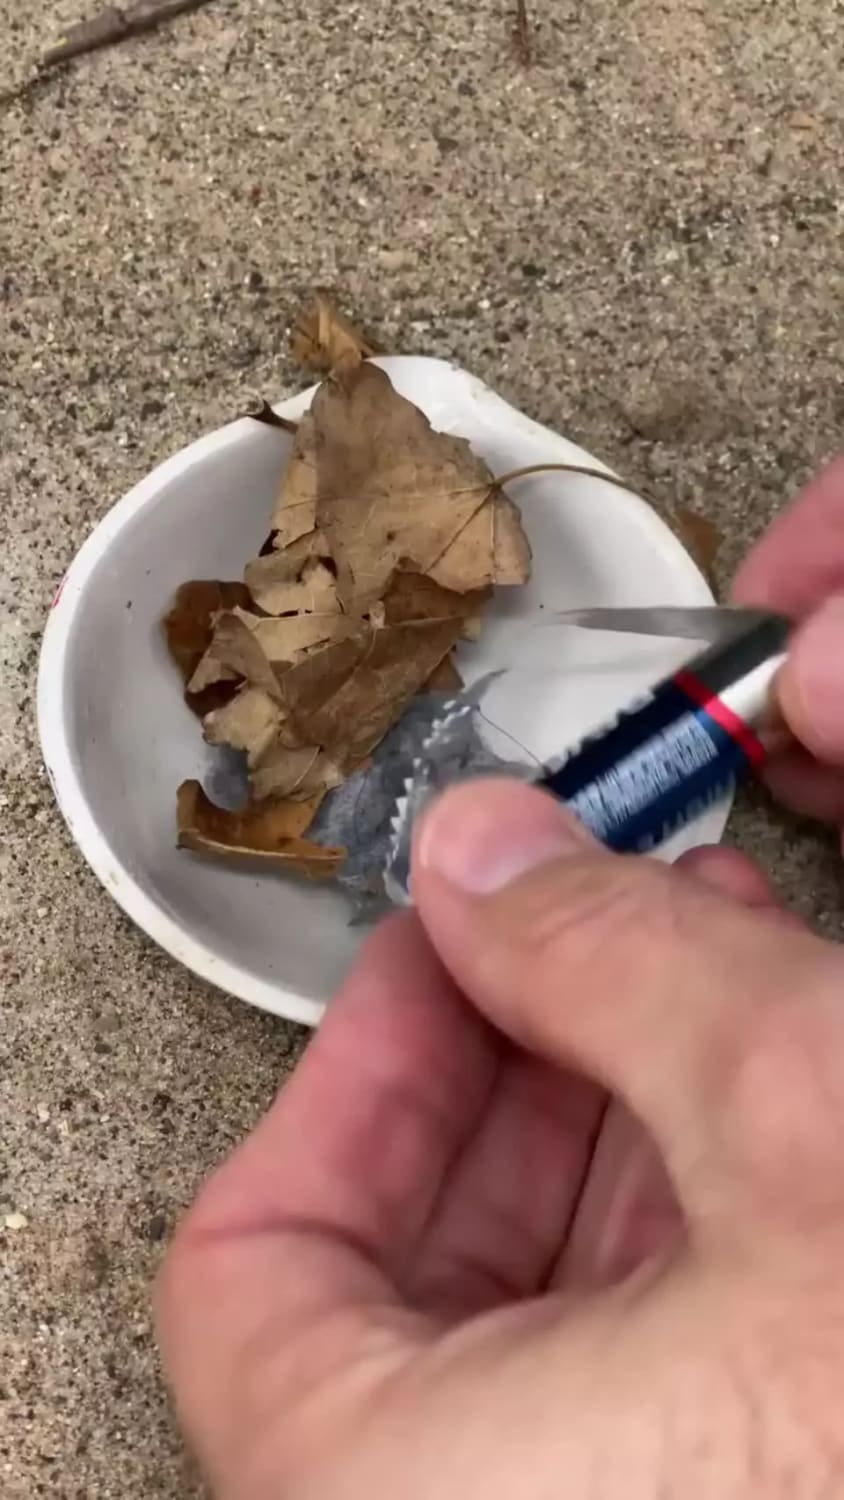 How to start a fire with a battery and gum wrapper